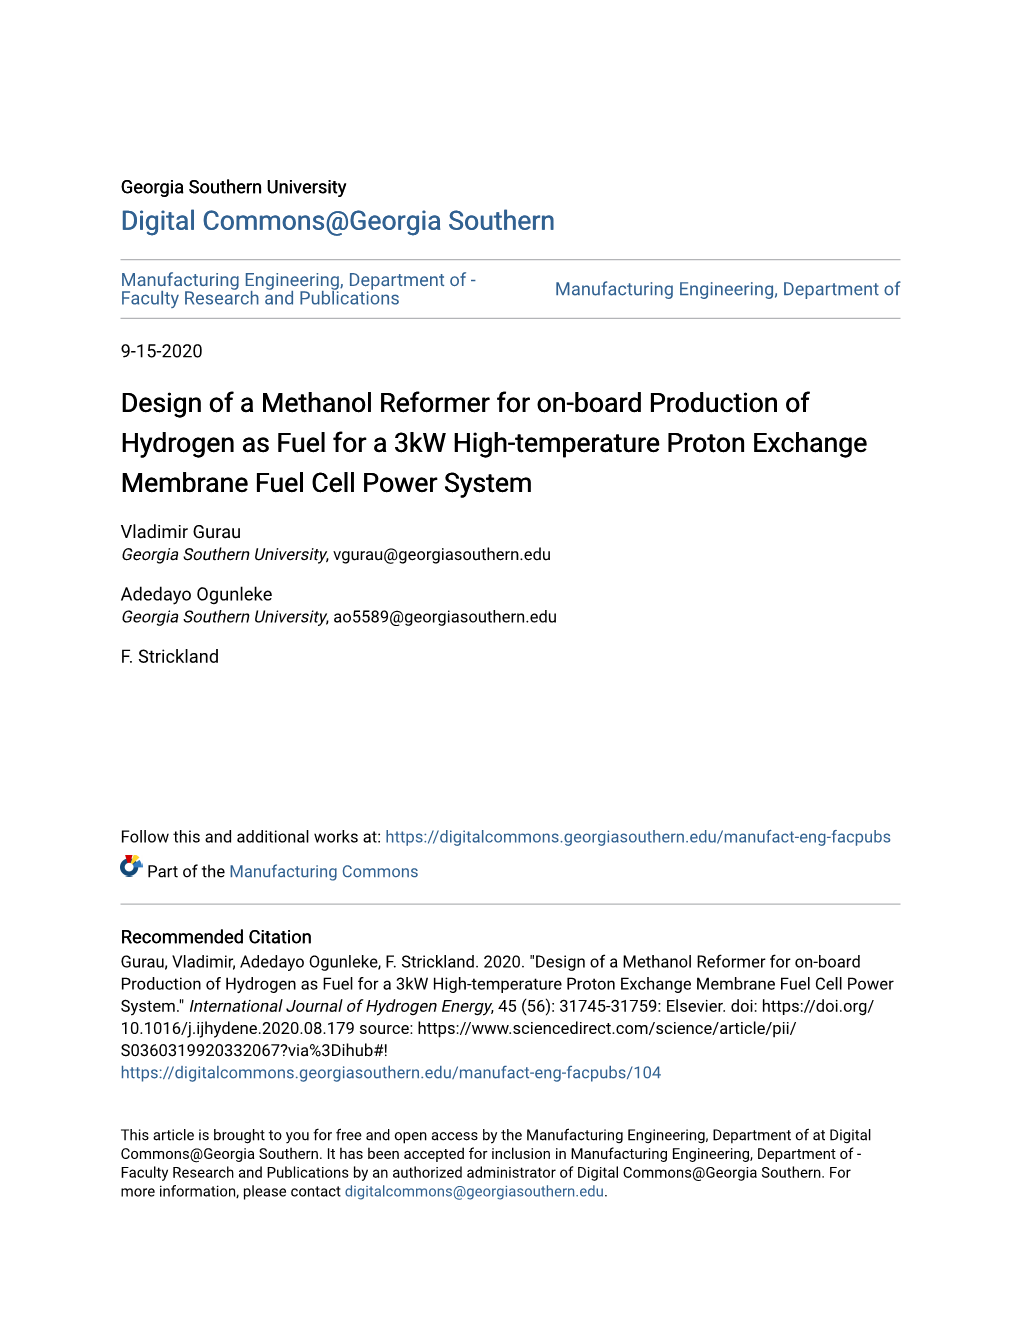 Design of a Methanol Reformer for On-Board Production of Hydrogen As Fuel for a 3Kw High-Temperature Proton Exchange Membrane Fuel Cell Power System